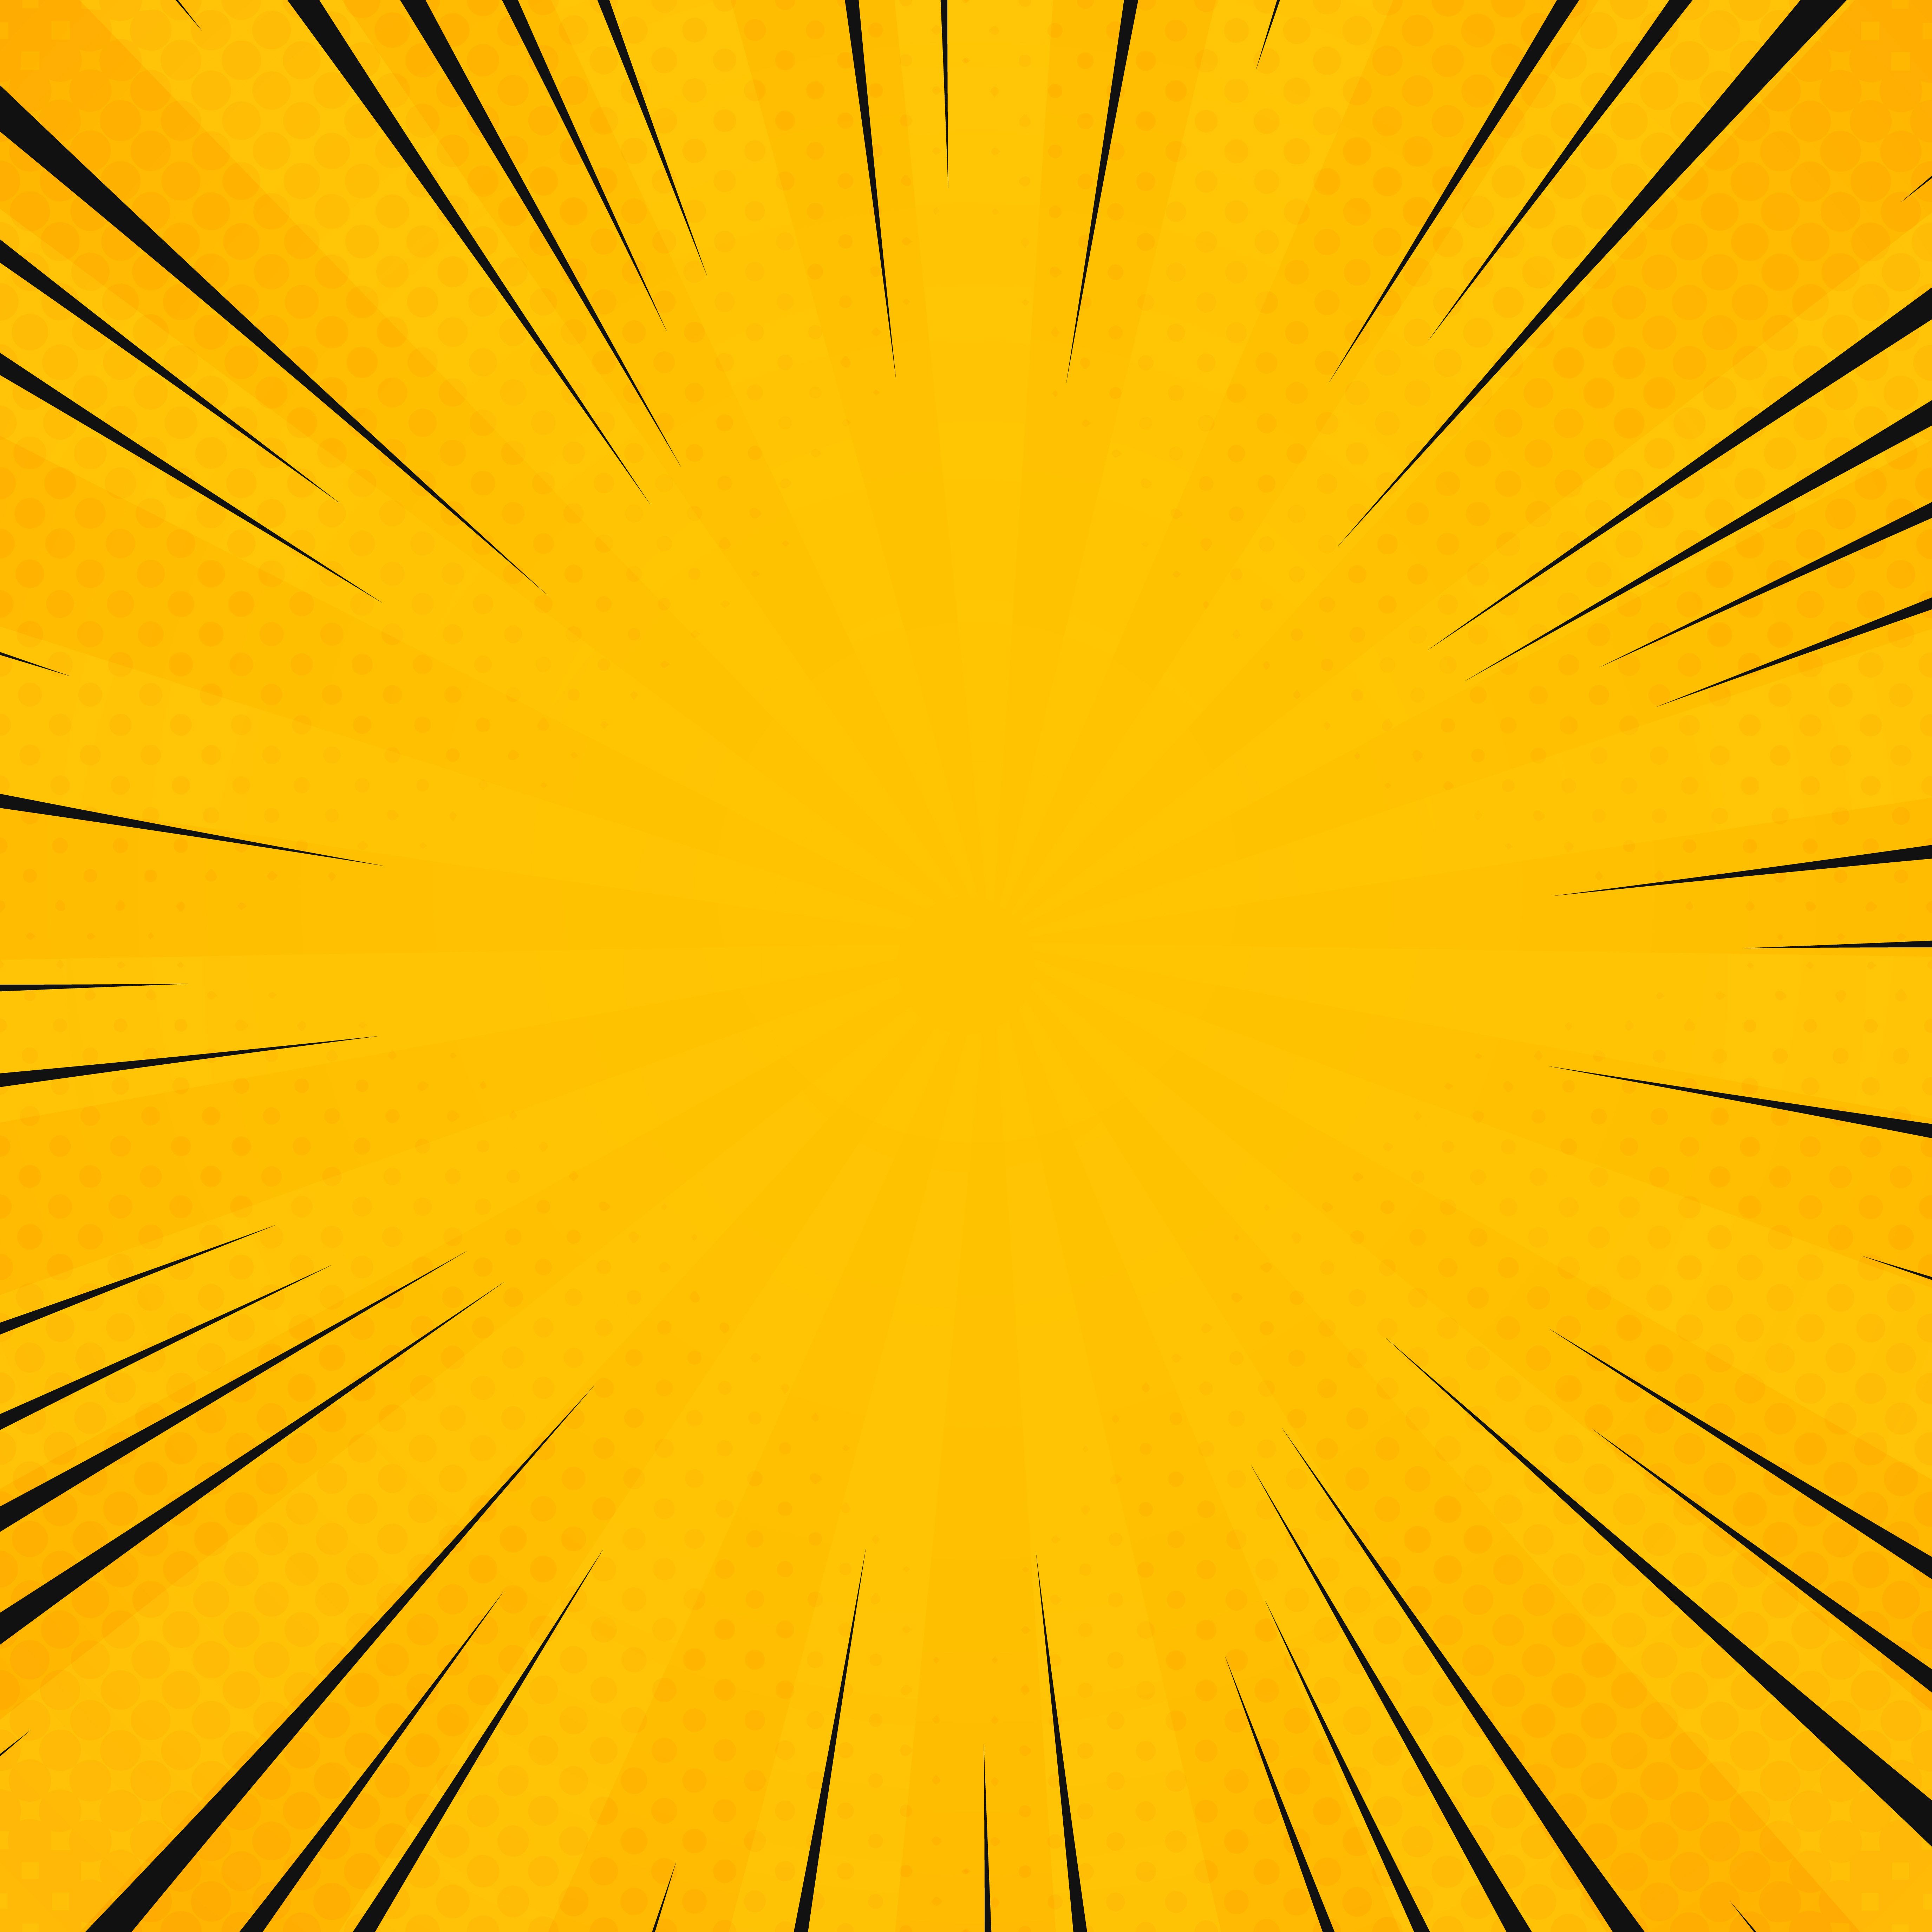 Abstract sun yellow color in radiance rays pattern with comic black line background. Decoration for poster texting, banner art work, banner, show text. Free Vectors, Clipart Graphics & Vector Art